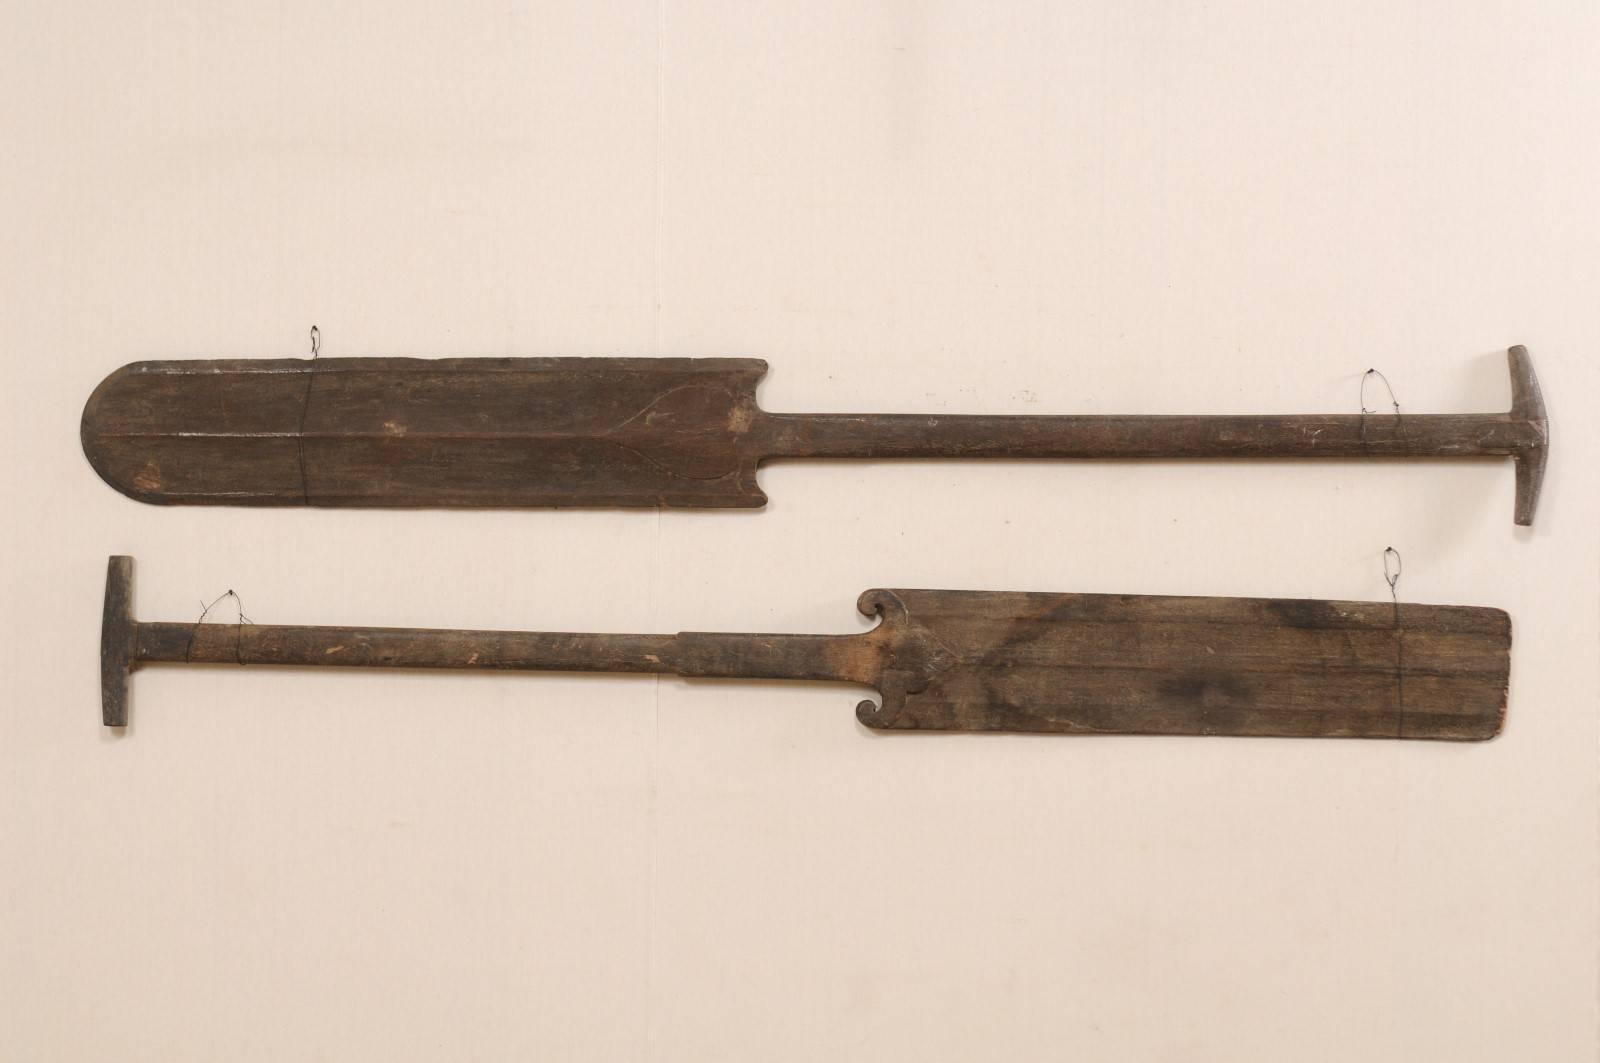 A pair of large-sized South Indian (Kerala) wooden boat steering paddles from the mid-20th century. This pair of hand-carved boat oars from Kerala is adorn with decoratively carved accents at the top of the blade with raised textured striping down